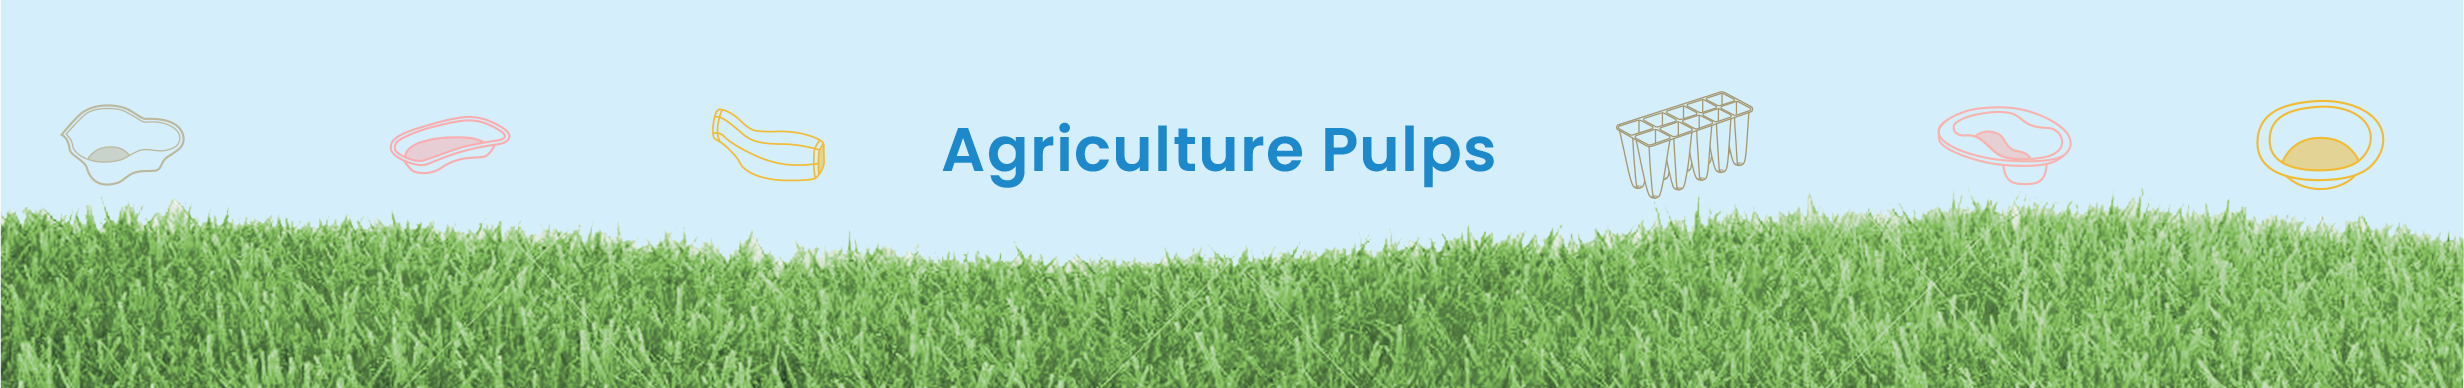 Agriculture-Pulps-Banner.png